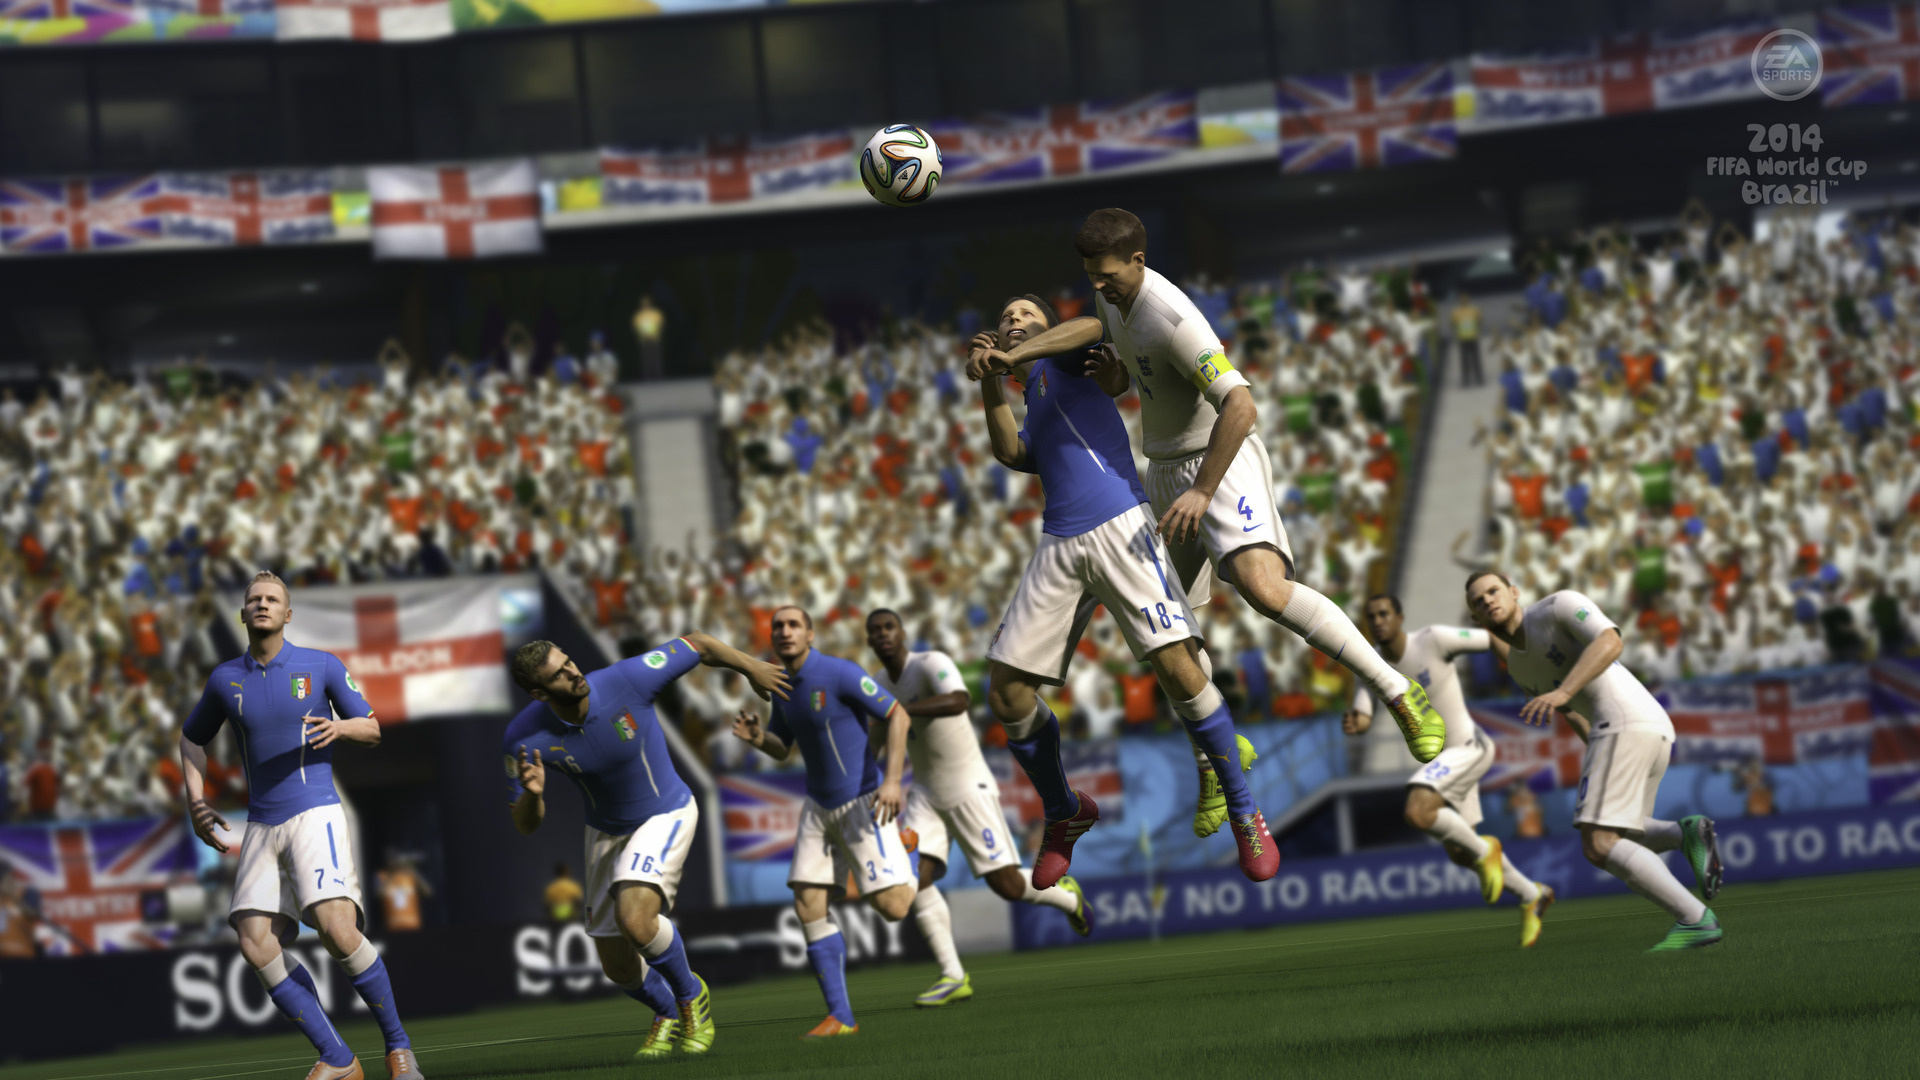 EA Sports 2014 FIFA World Cup Brazil (PS3 / PlayStation 3) Game Profile ...